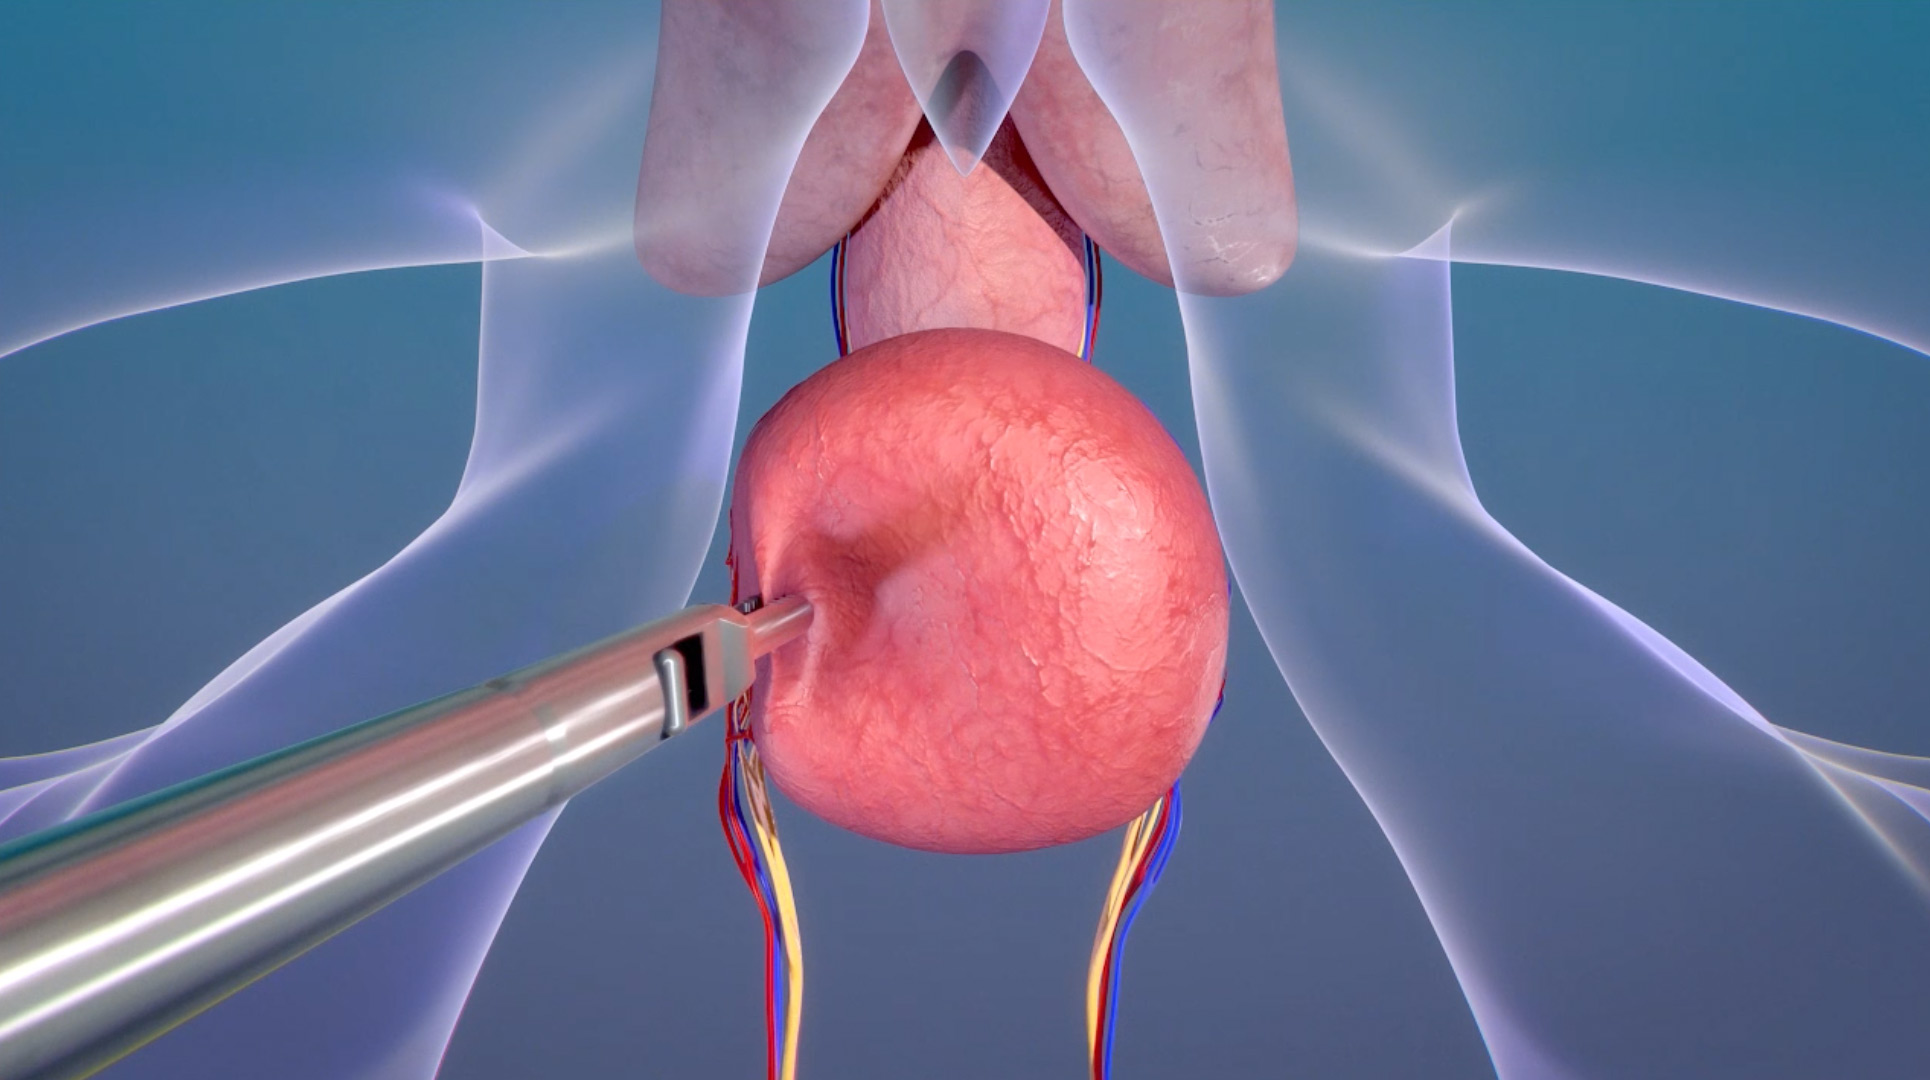 Levita® Magnetics Announces Expanded Indication of Magnetic Surgical System  for Use in Prostatectomy Procedures - Magnetic Surgery